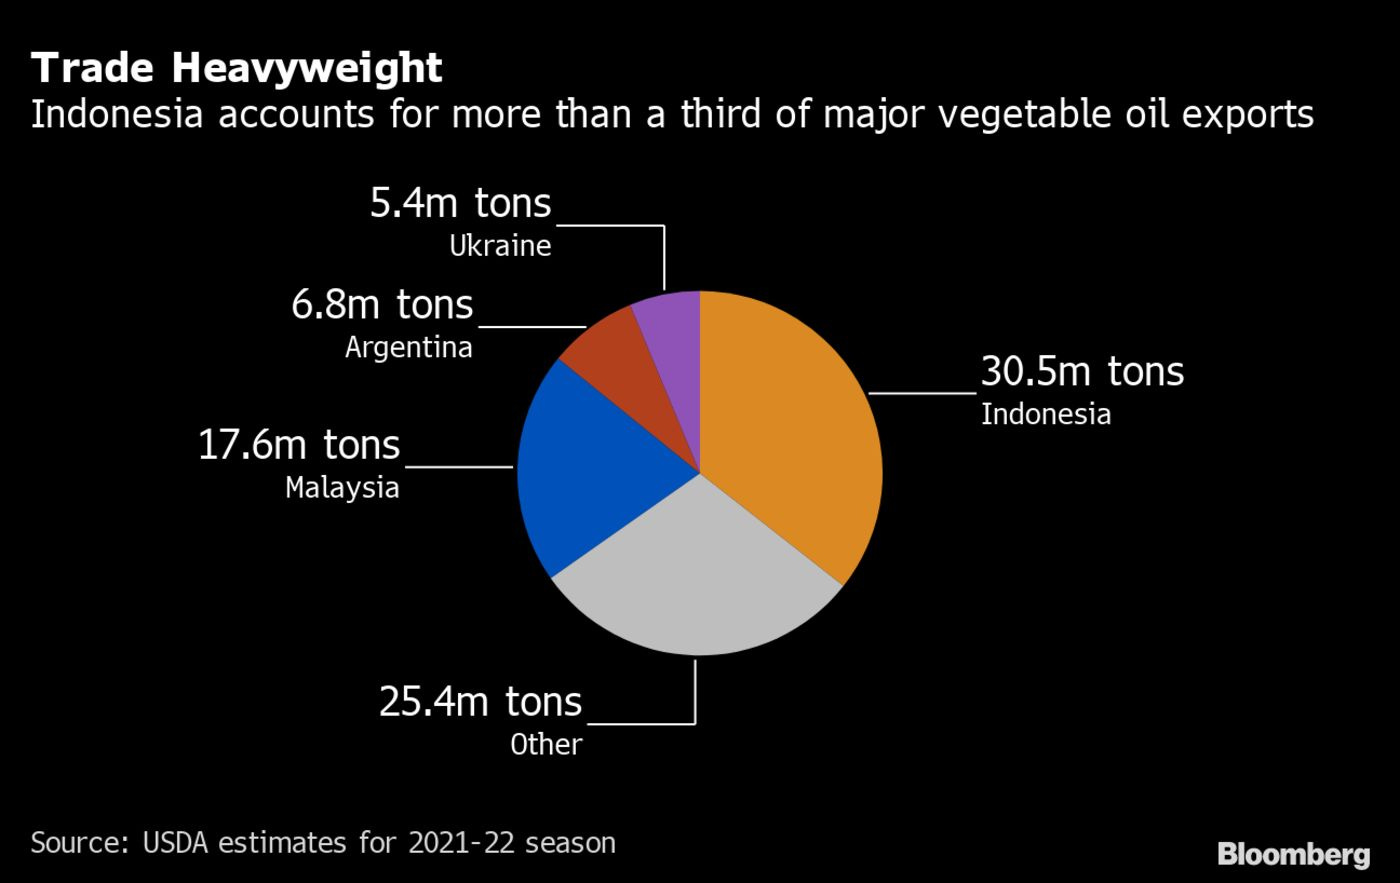 Trade Heavyweight | Indonesia accounts for more than a third of major vegetable oil exports